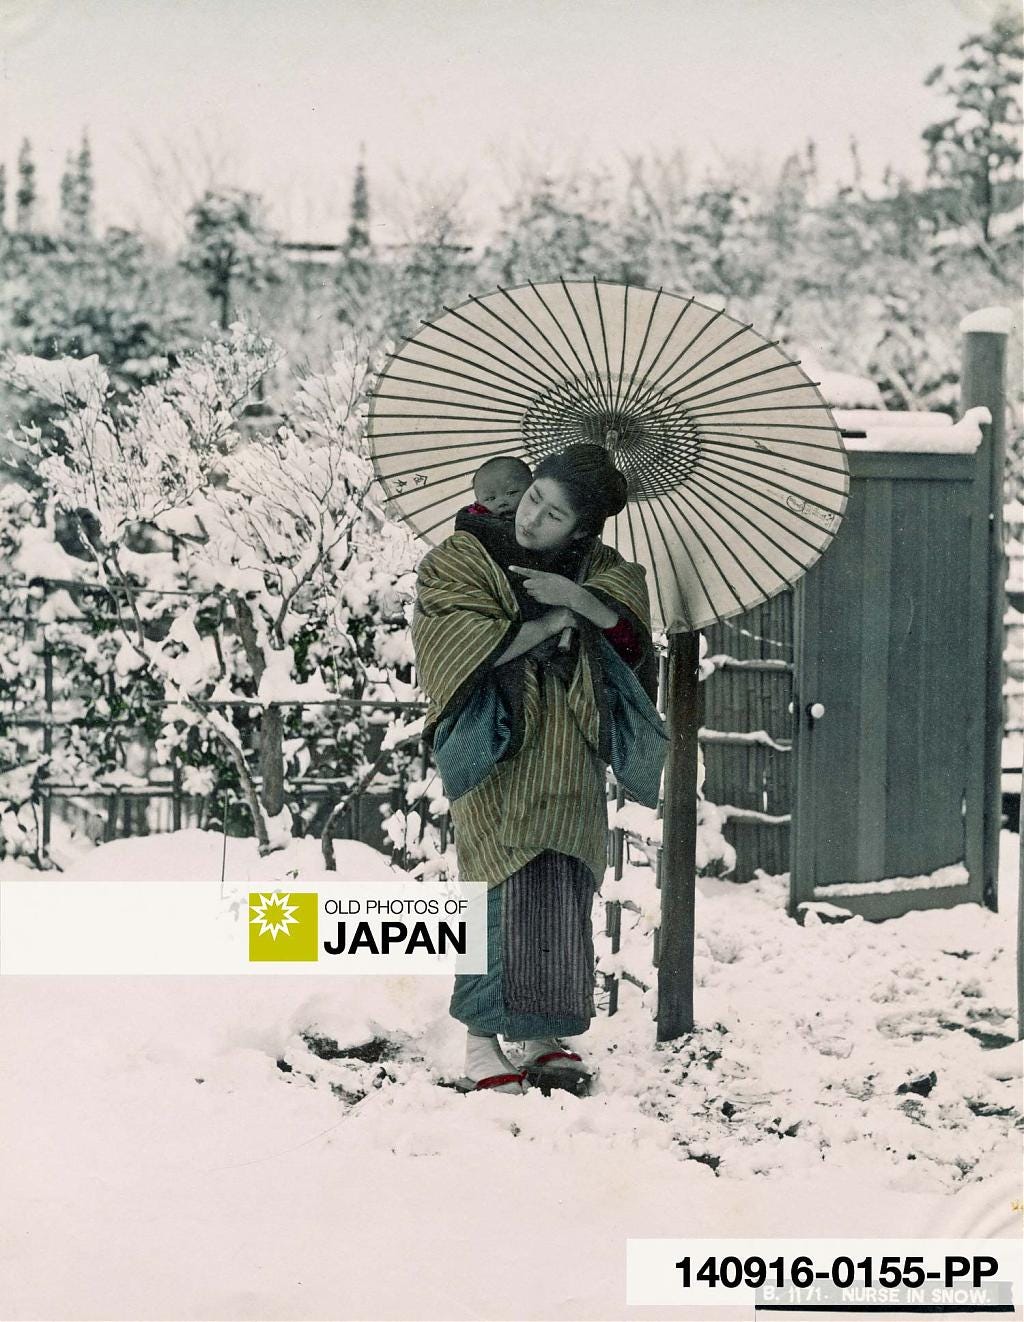 Japanese komori nursemaid and her charge in the snow, 1890s